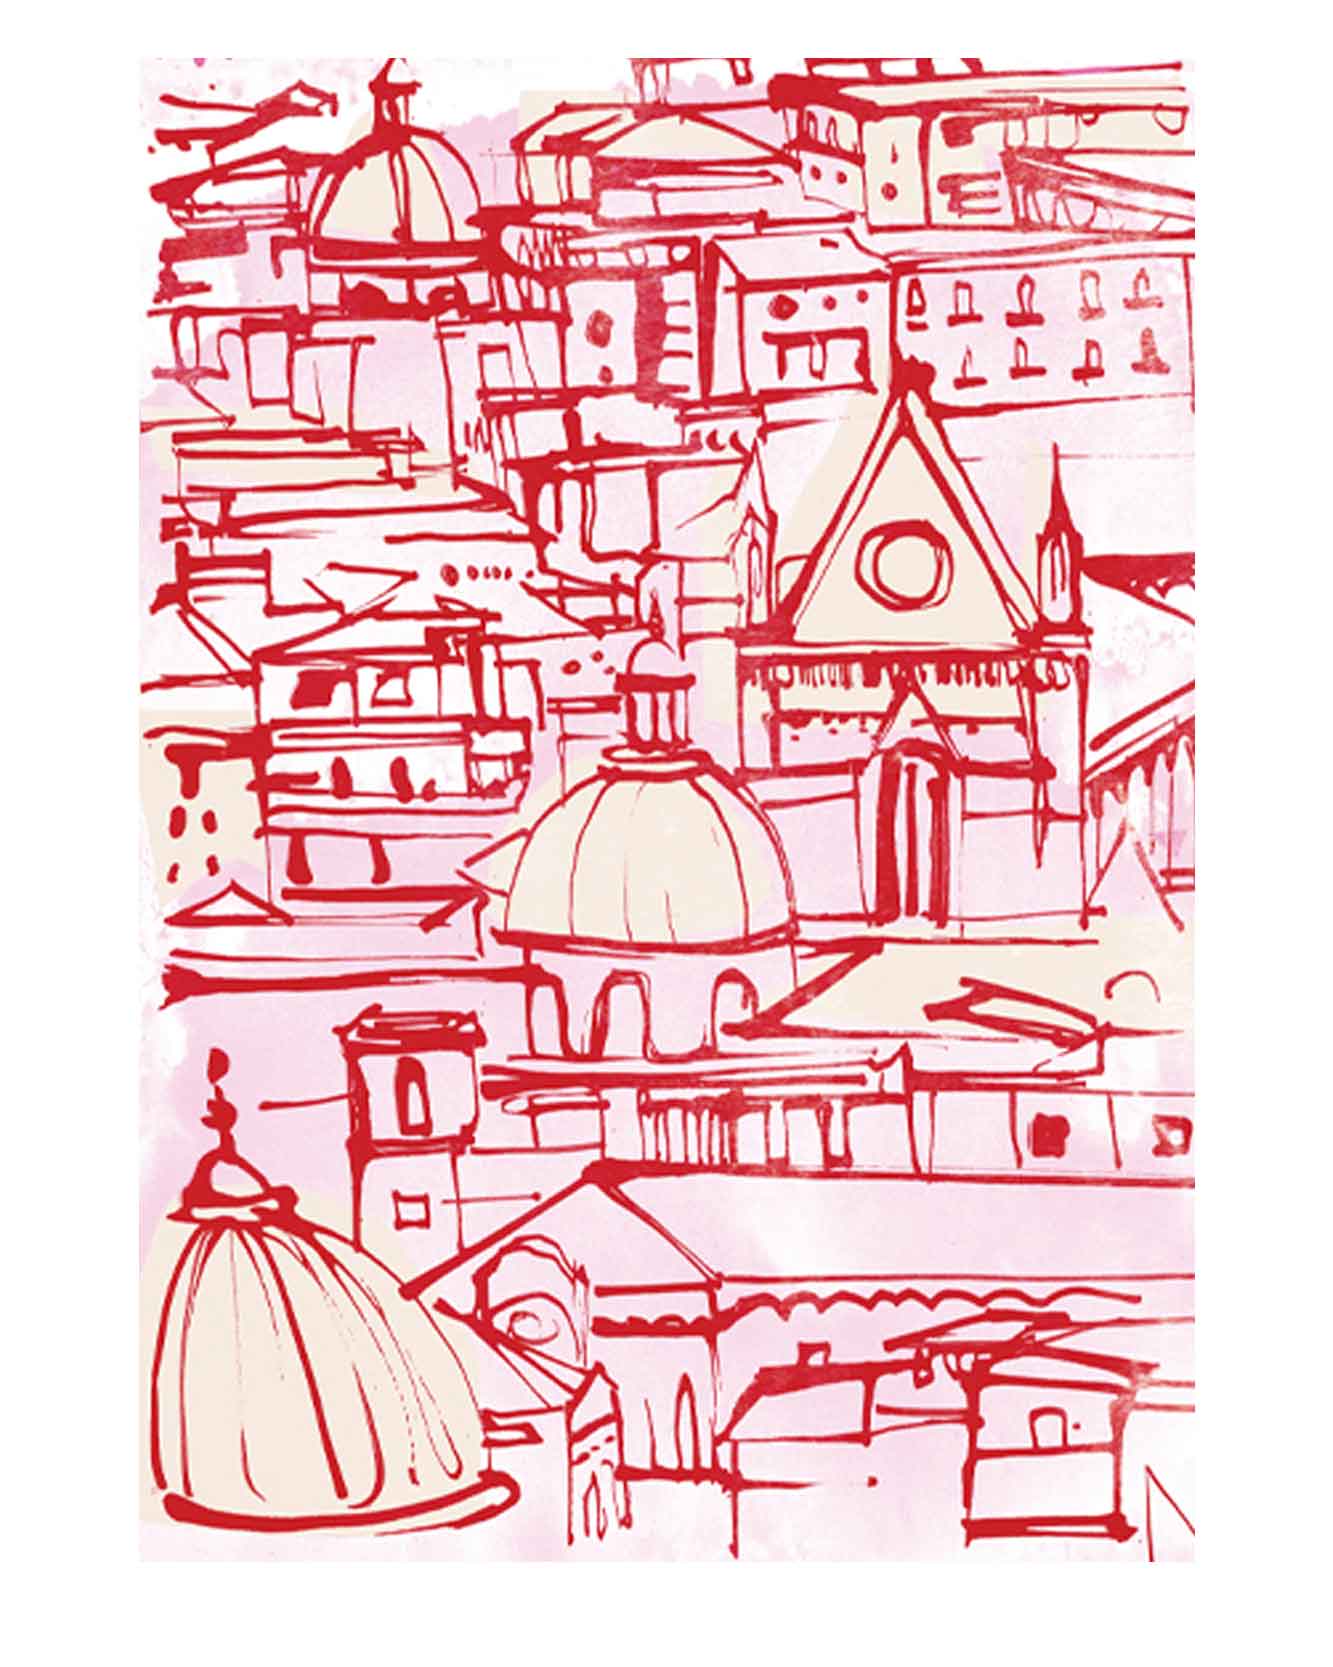 Detail. Silk scarf illustration. Inspired by Italian city of Naples for fashion brand Kiton, who's headquarters are in the ancient Italian city. Simple linear style illustration and flat colours taken from the fashion houses upcoming collections. With drawings of famous Naples landmarks and architecture.